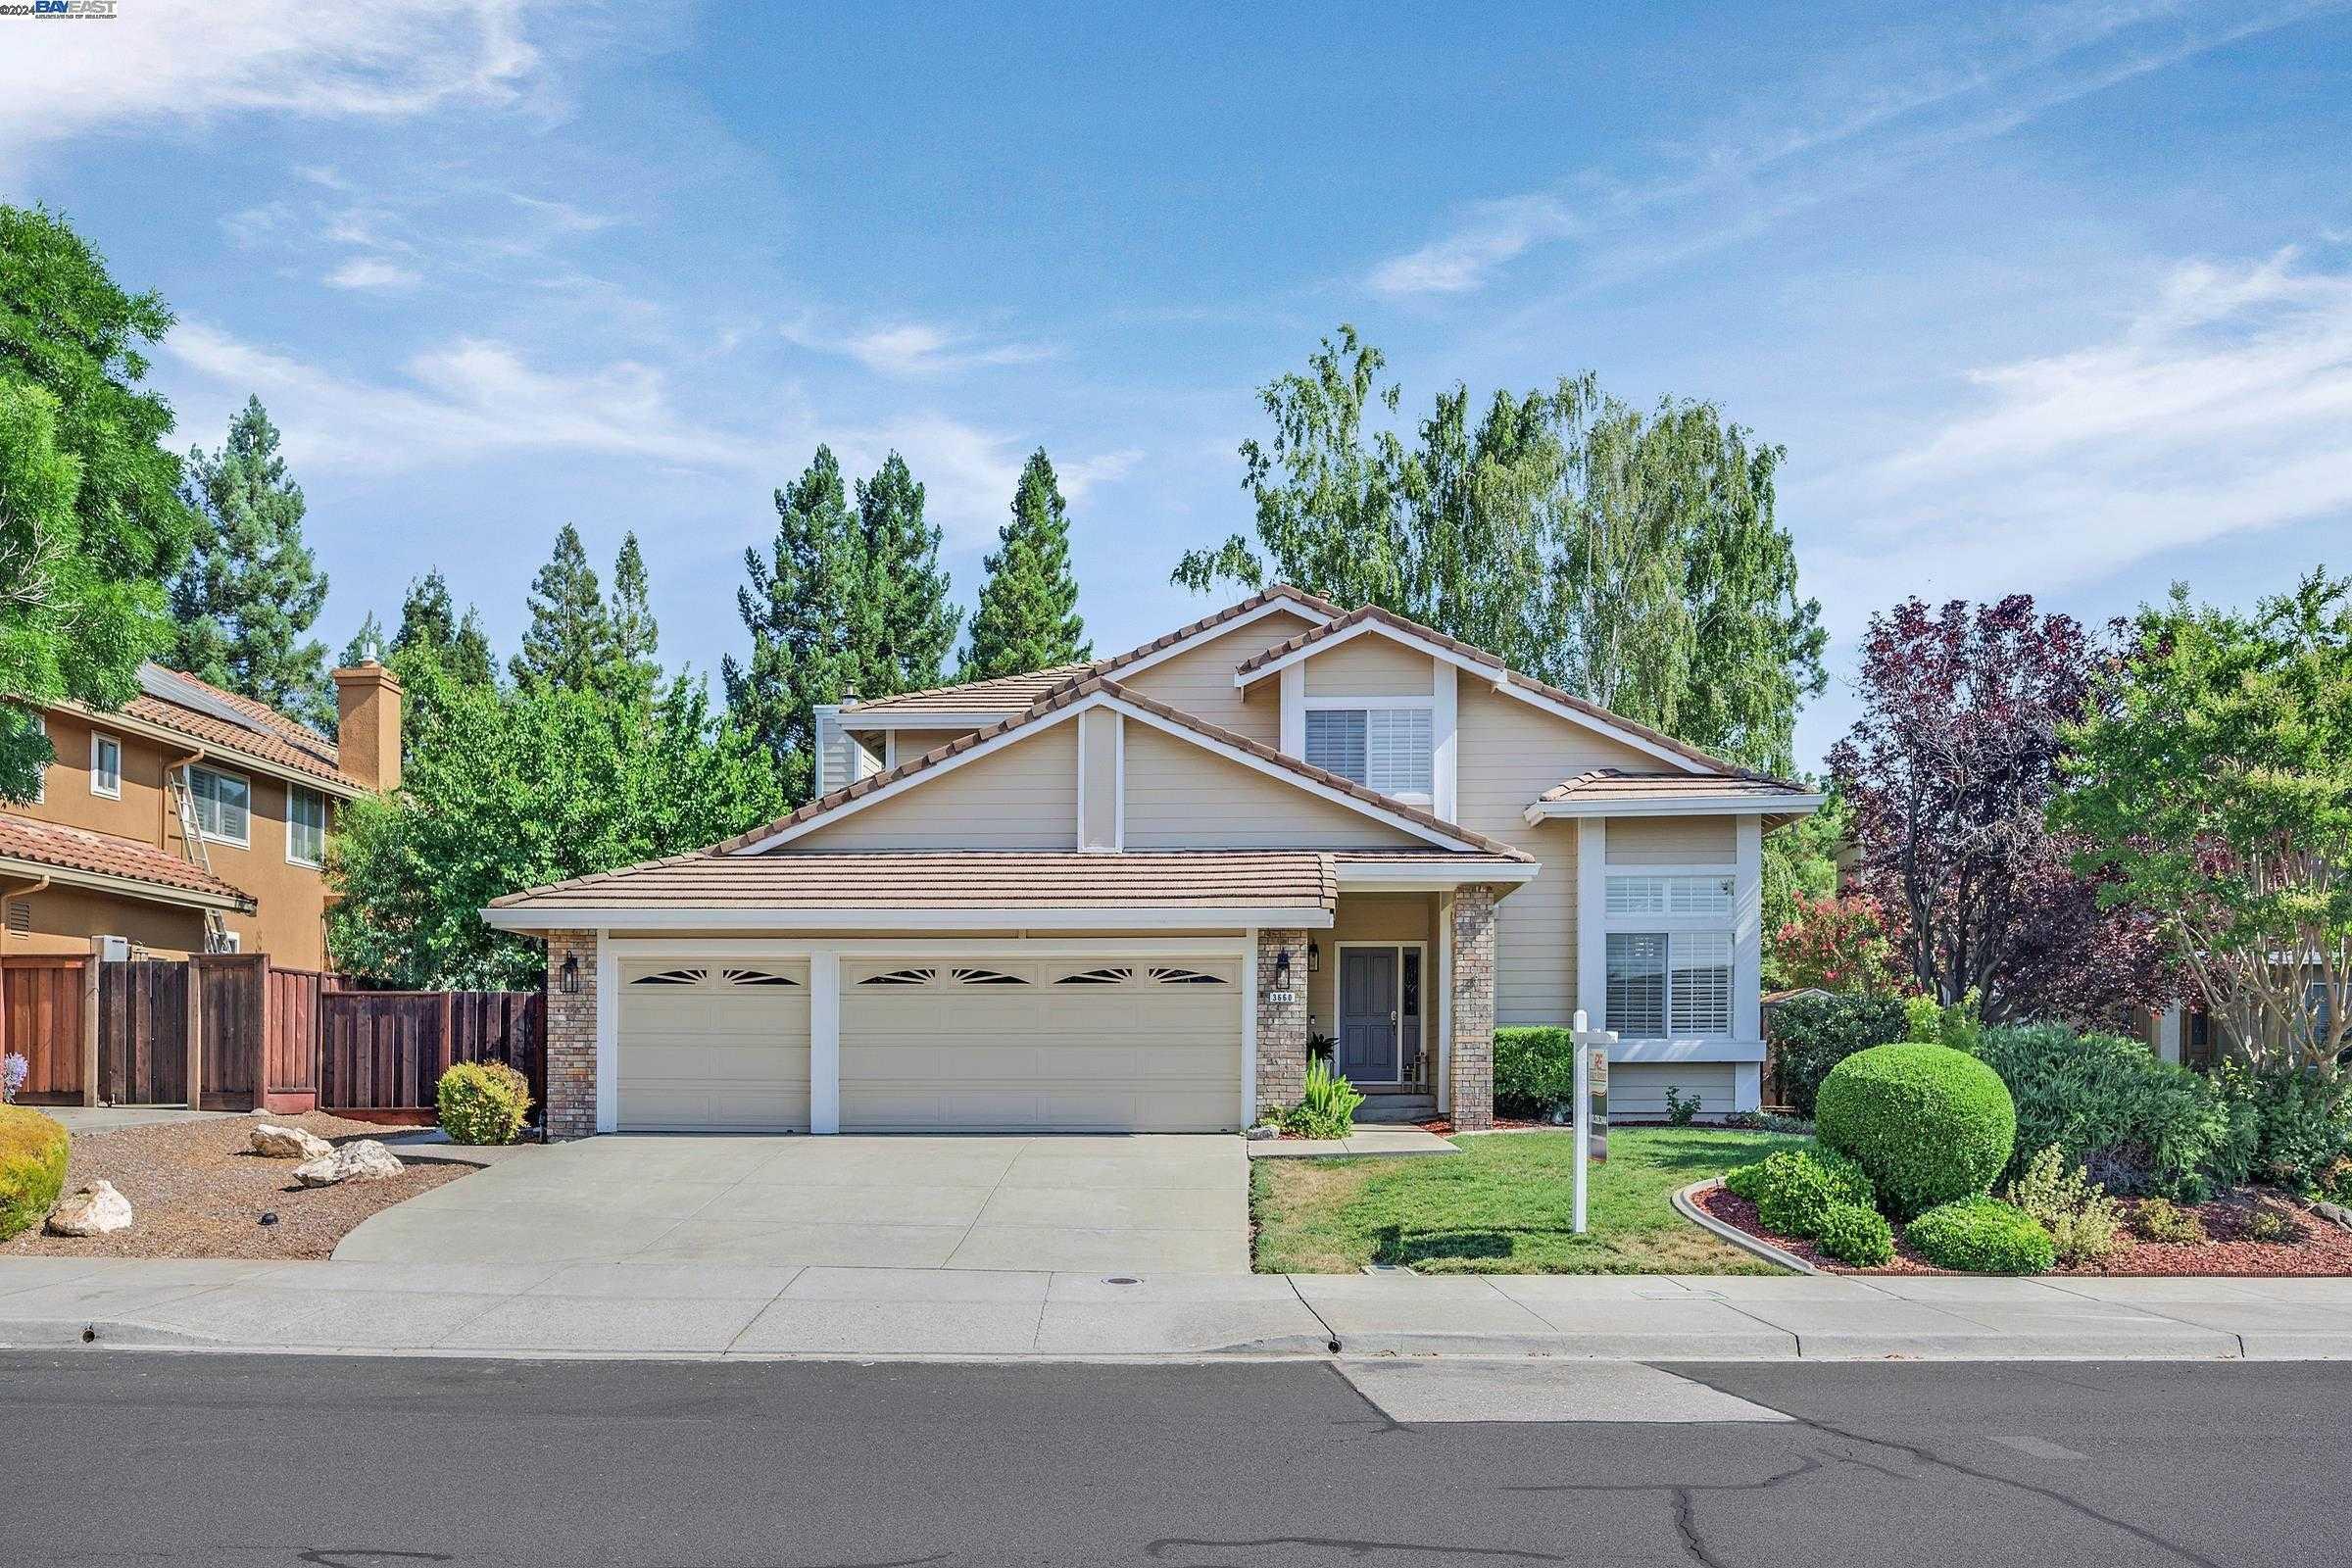 3660 Edinburgh Dr., 41066455, Livermore, Detached,  for sale, PK Ahuja, REALTY EXPERTS®